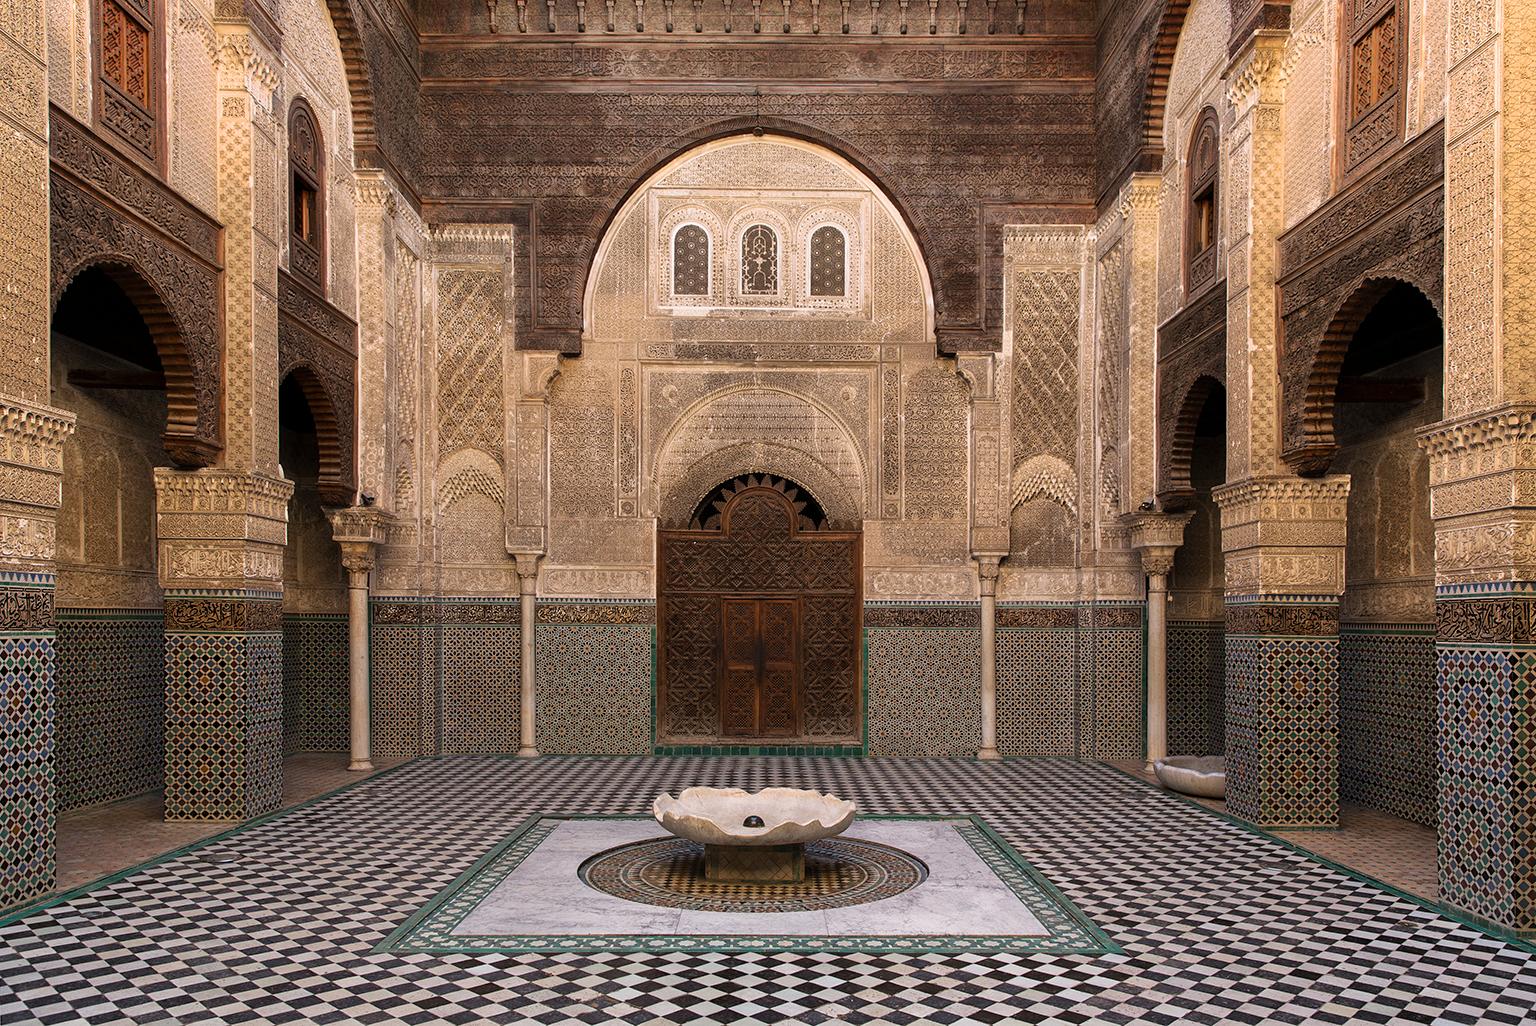  Cosmo Condina Color Photograph - Islamic architectural detail of the Medersa courtyard, Fez, Morocco, 2016